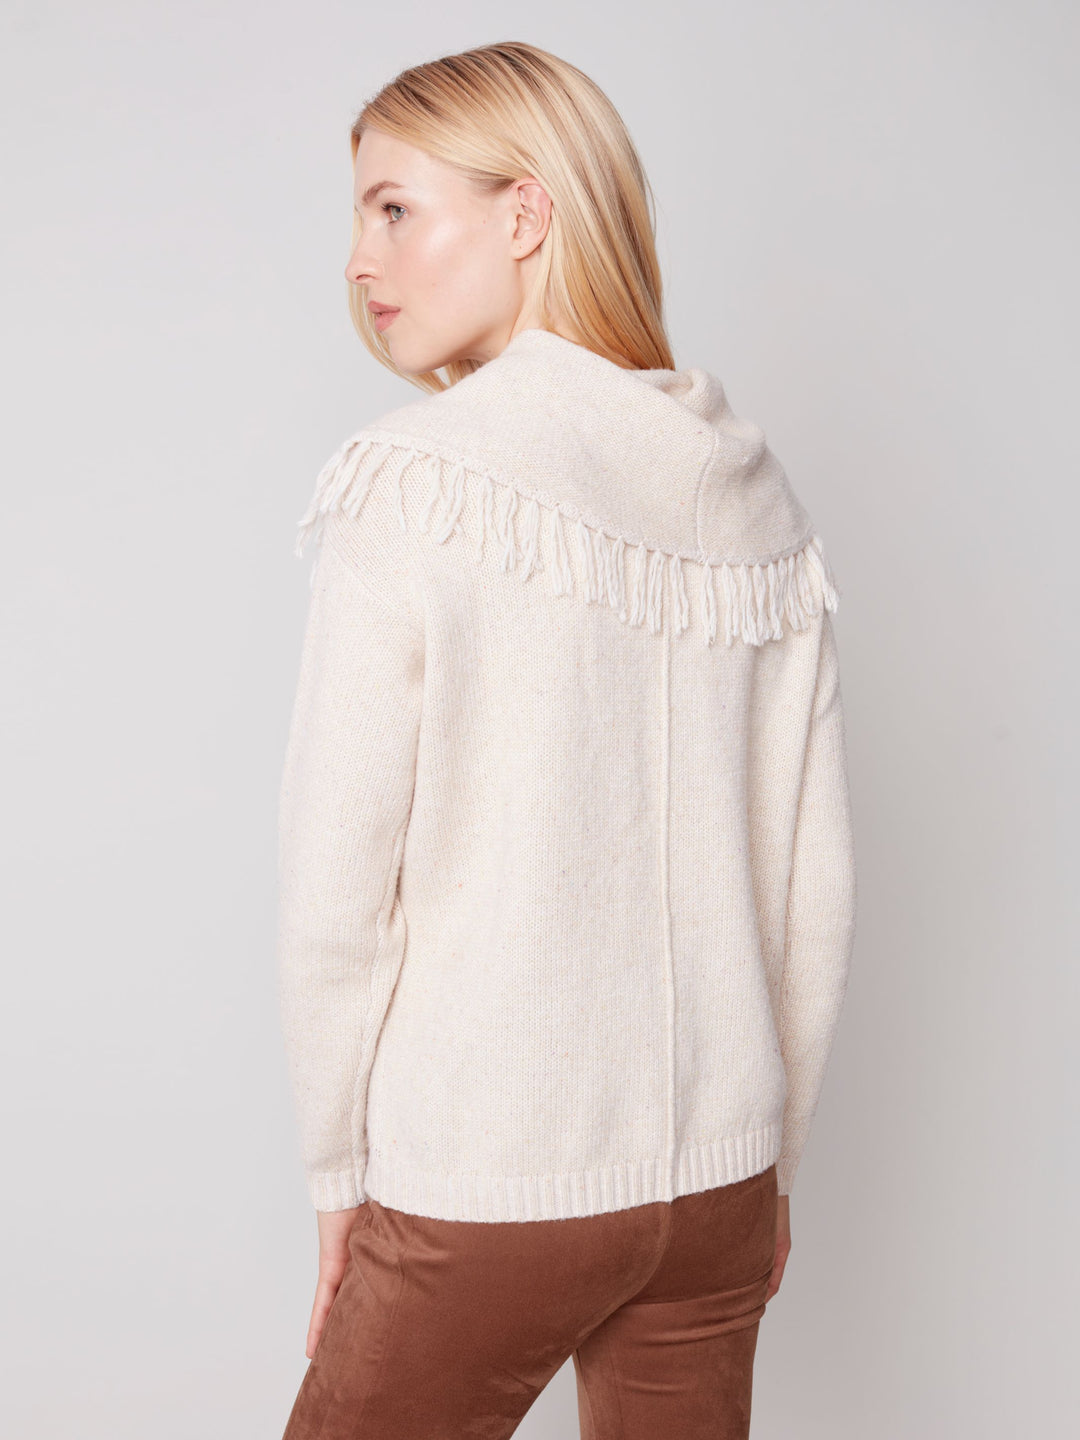 Charlie B Fringed Cowl Neck Sweater